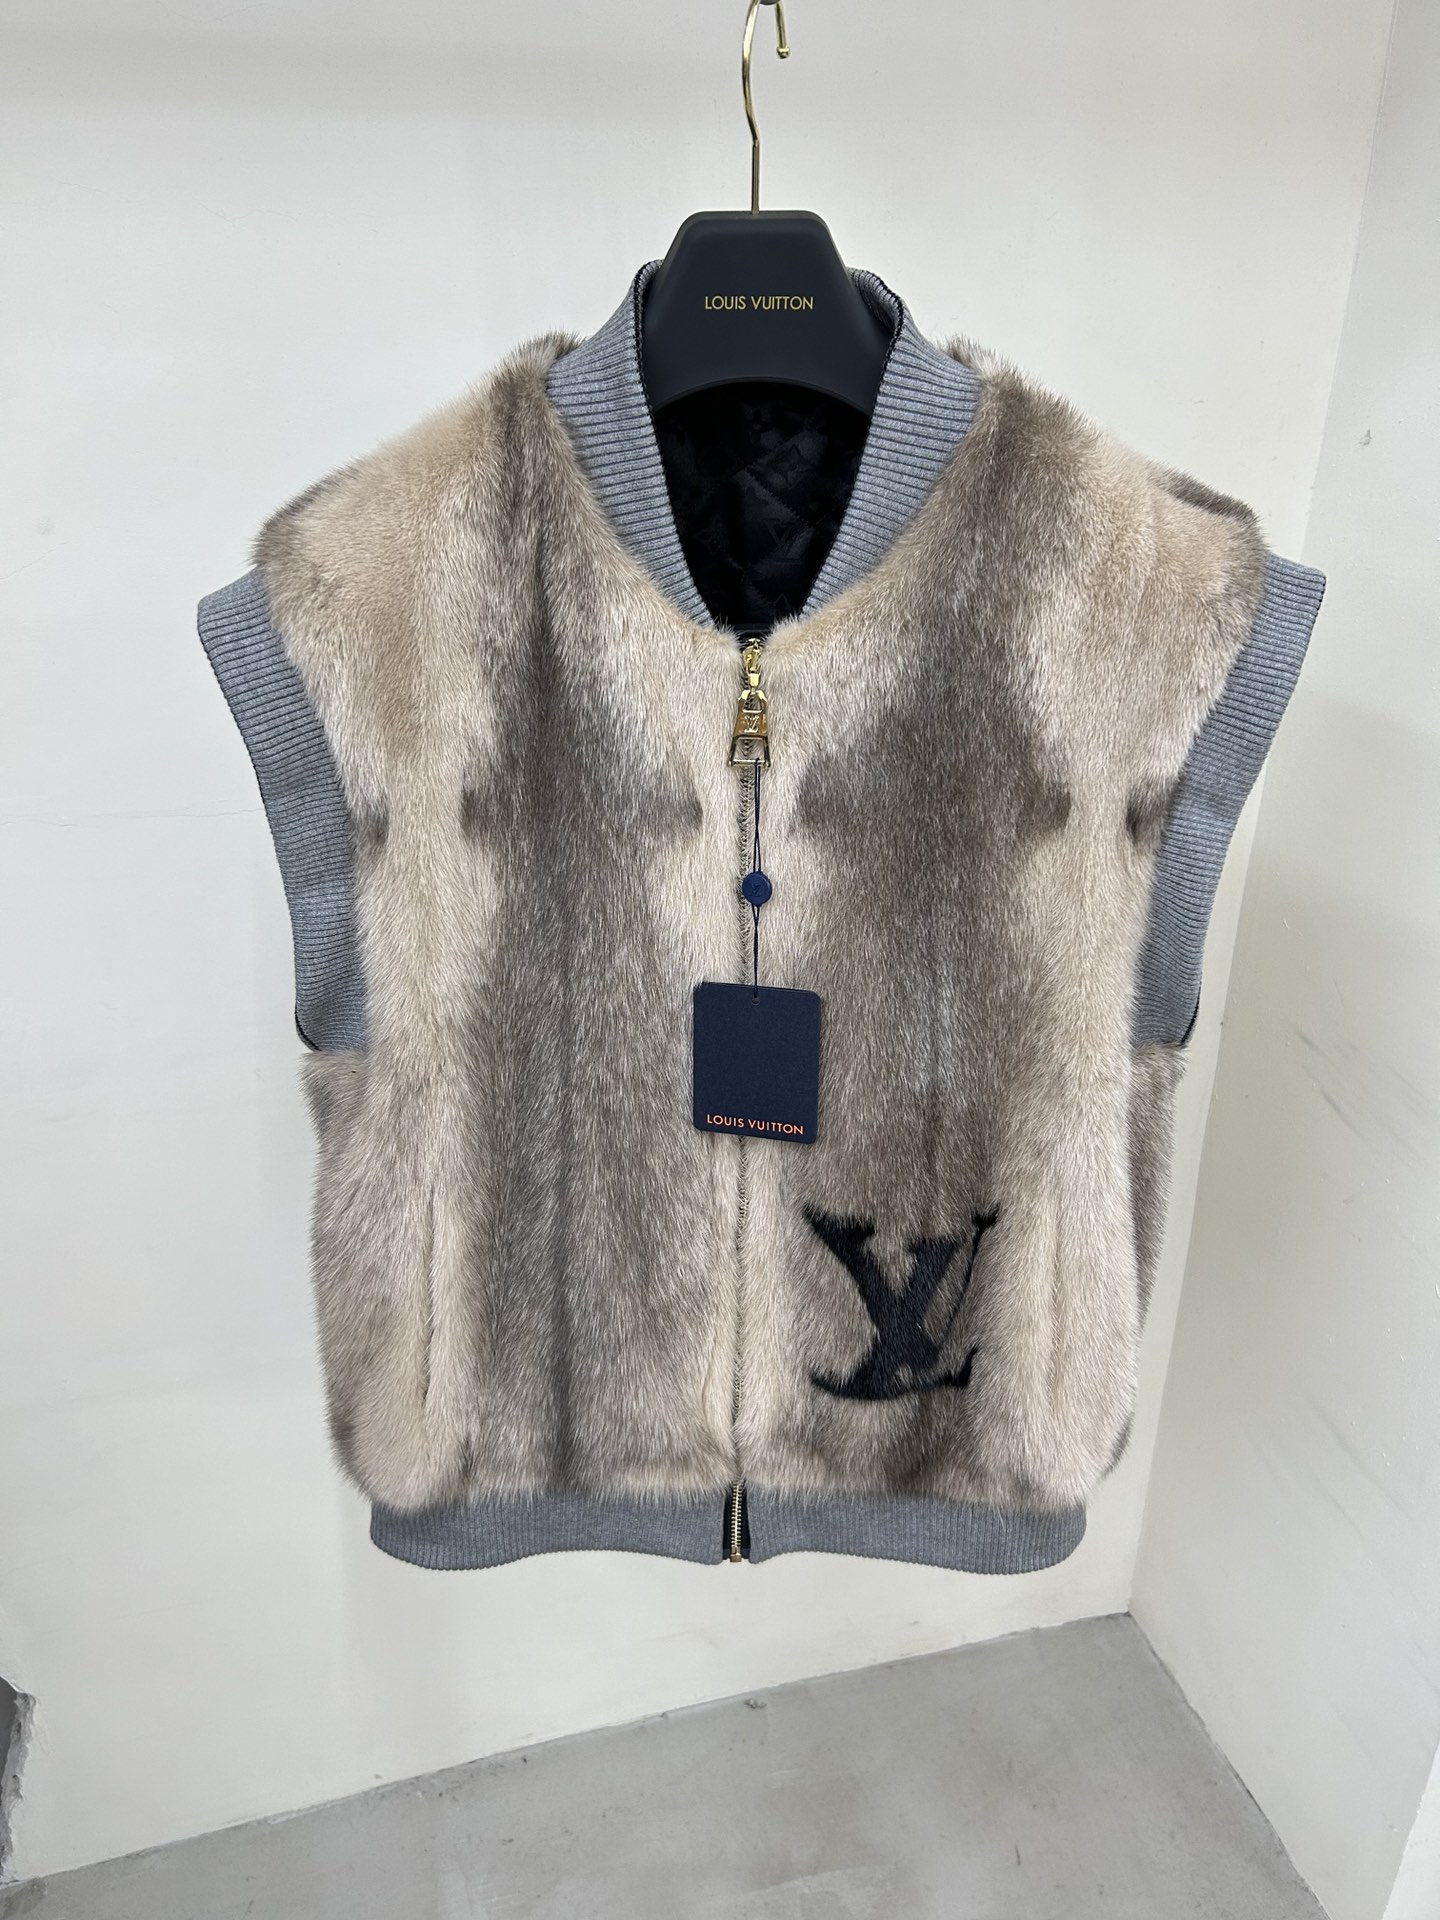 Louis Vuitton Clothing Waistcoat Unisex Fall/Winter Collection Fashion